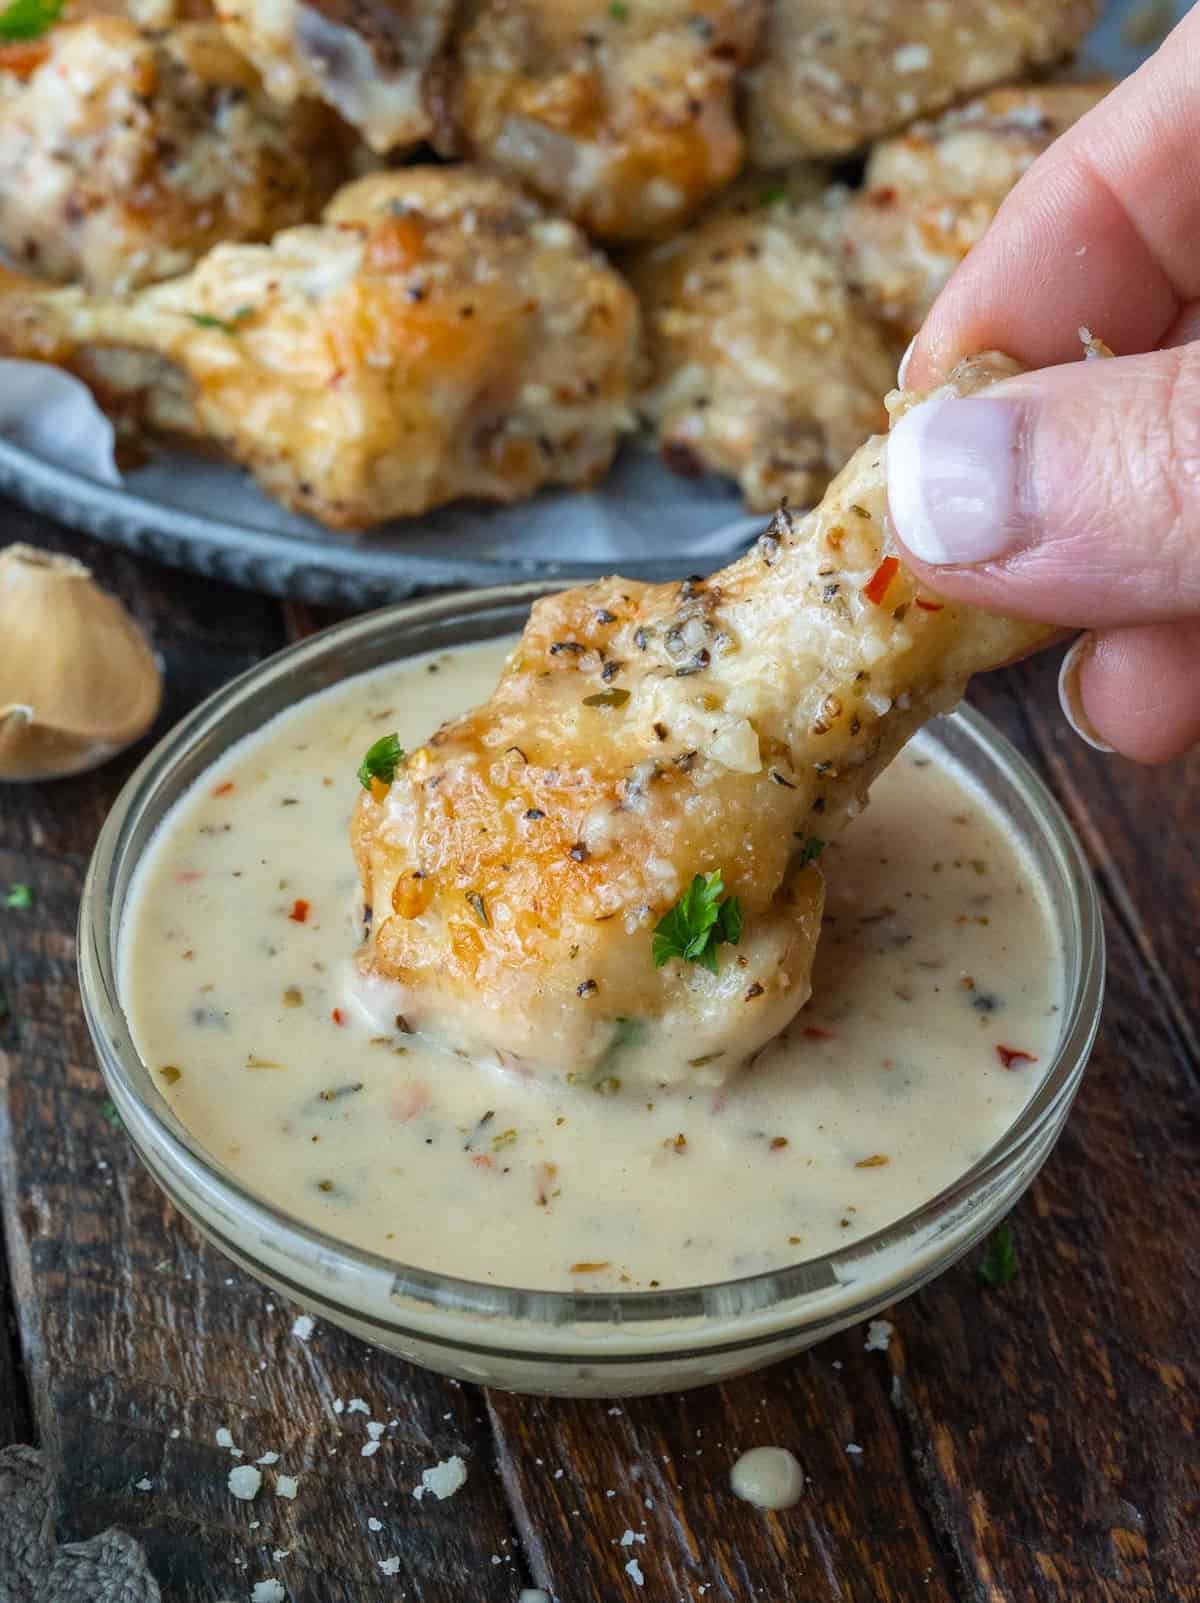 Garlic parmesan chicken wing being dipped into sauce.